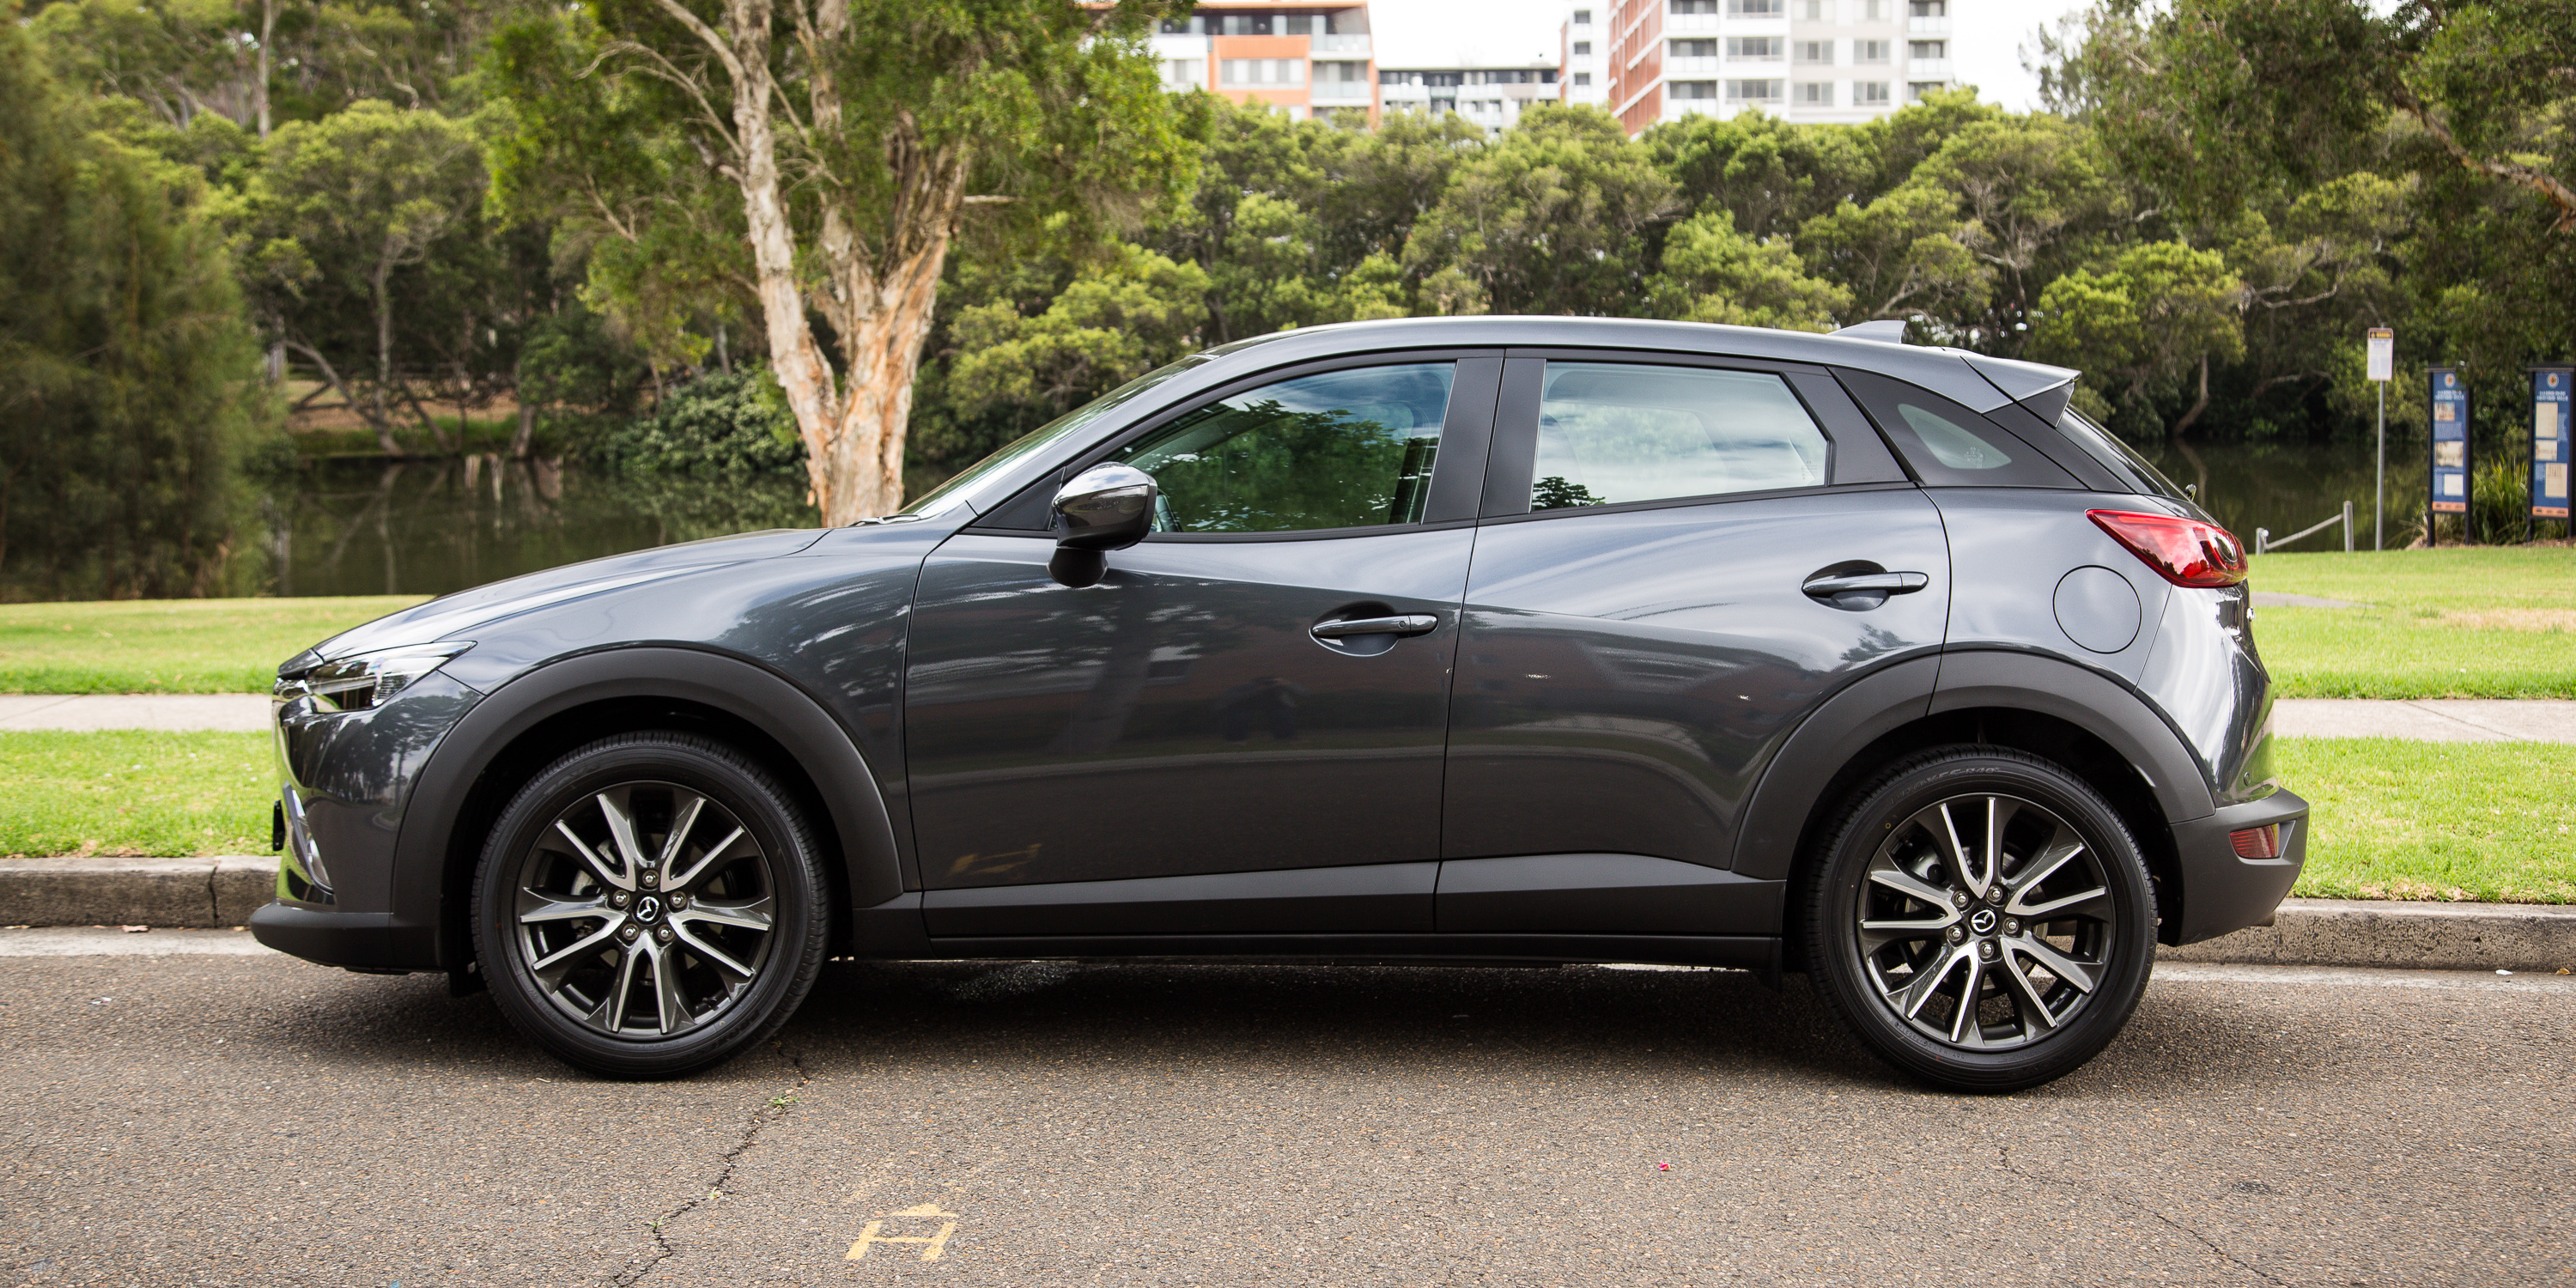 2017 Mazda CX-3 2WD sTouring review | CarAdvice